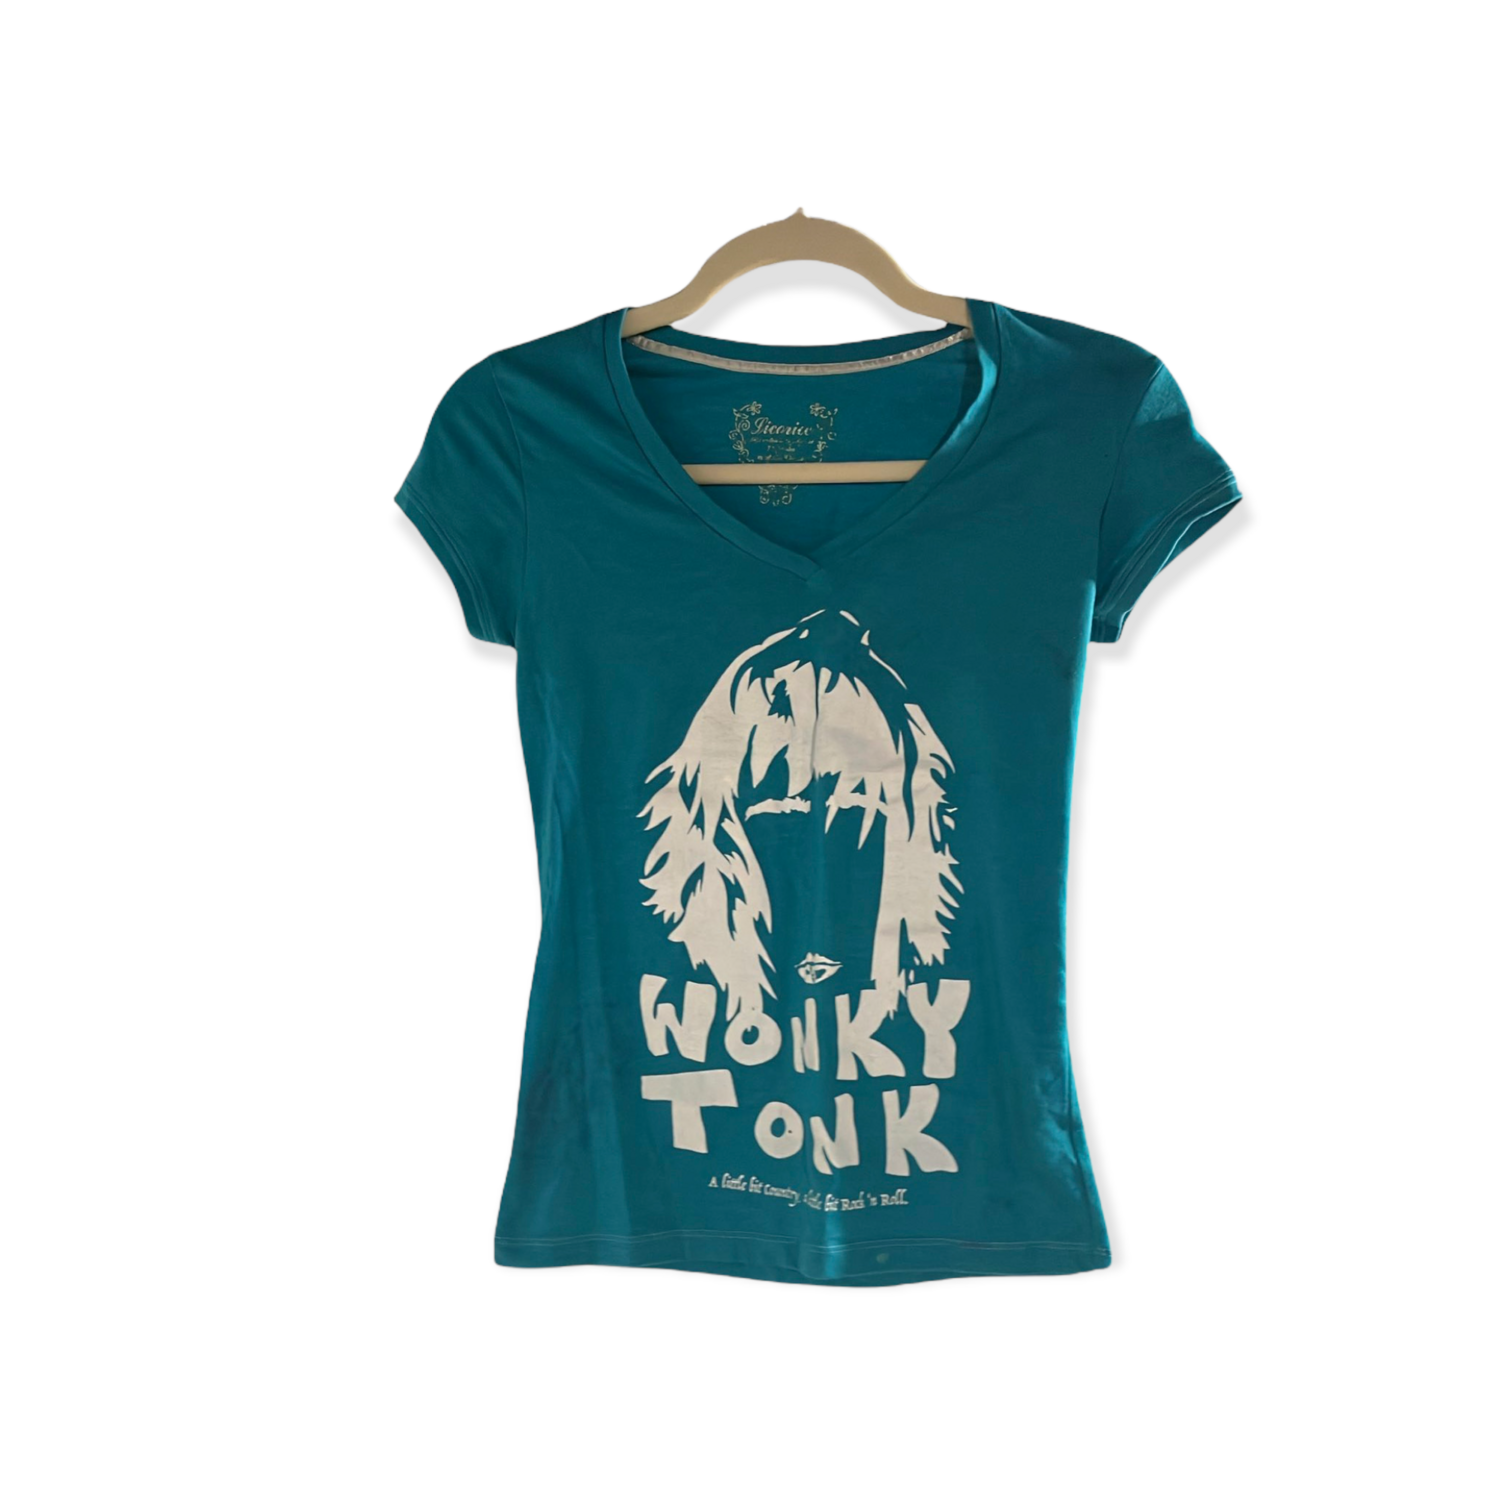 ONE OF A KIND Teal Wonk Face T-shirt, Children's M